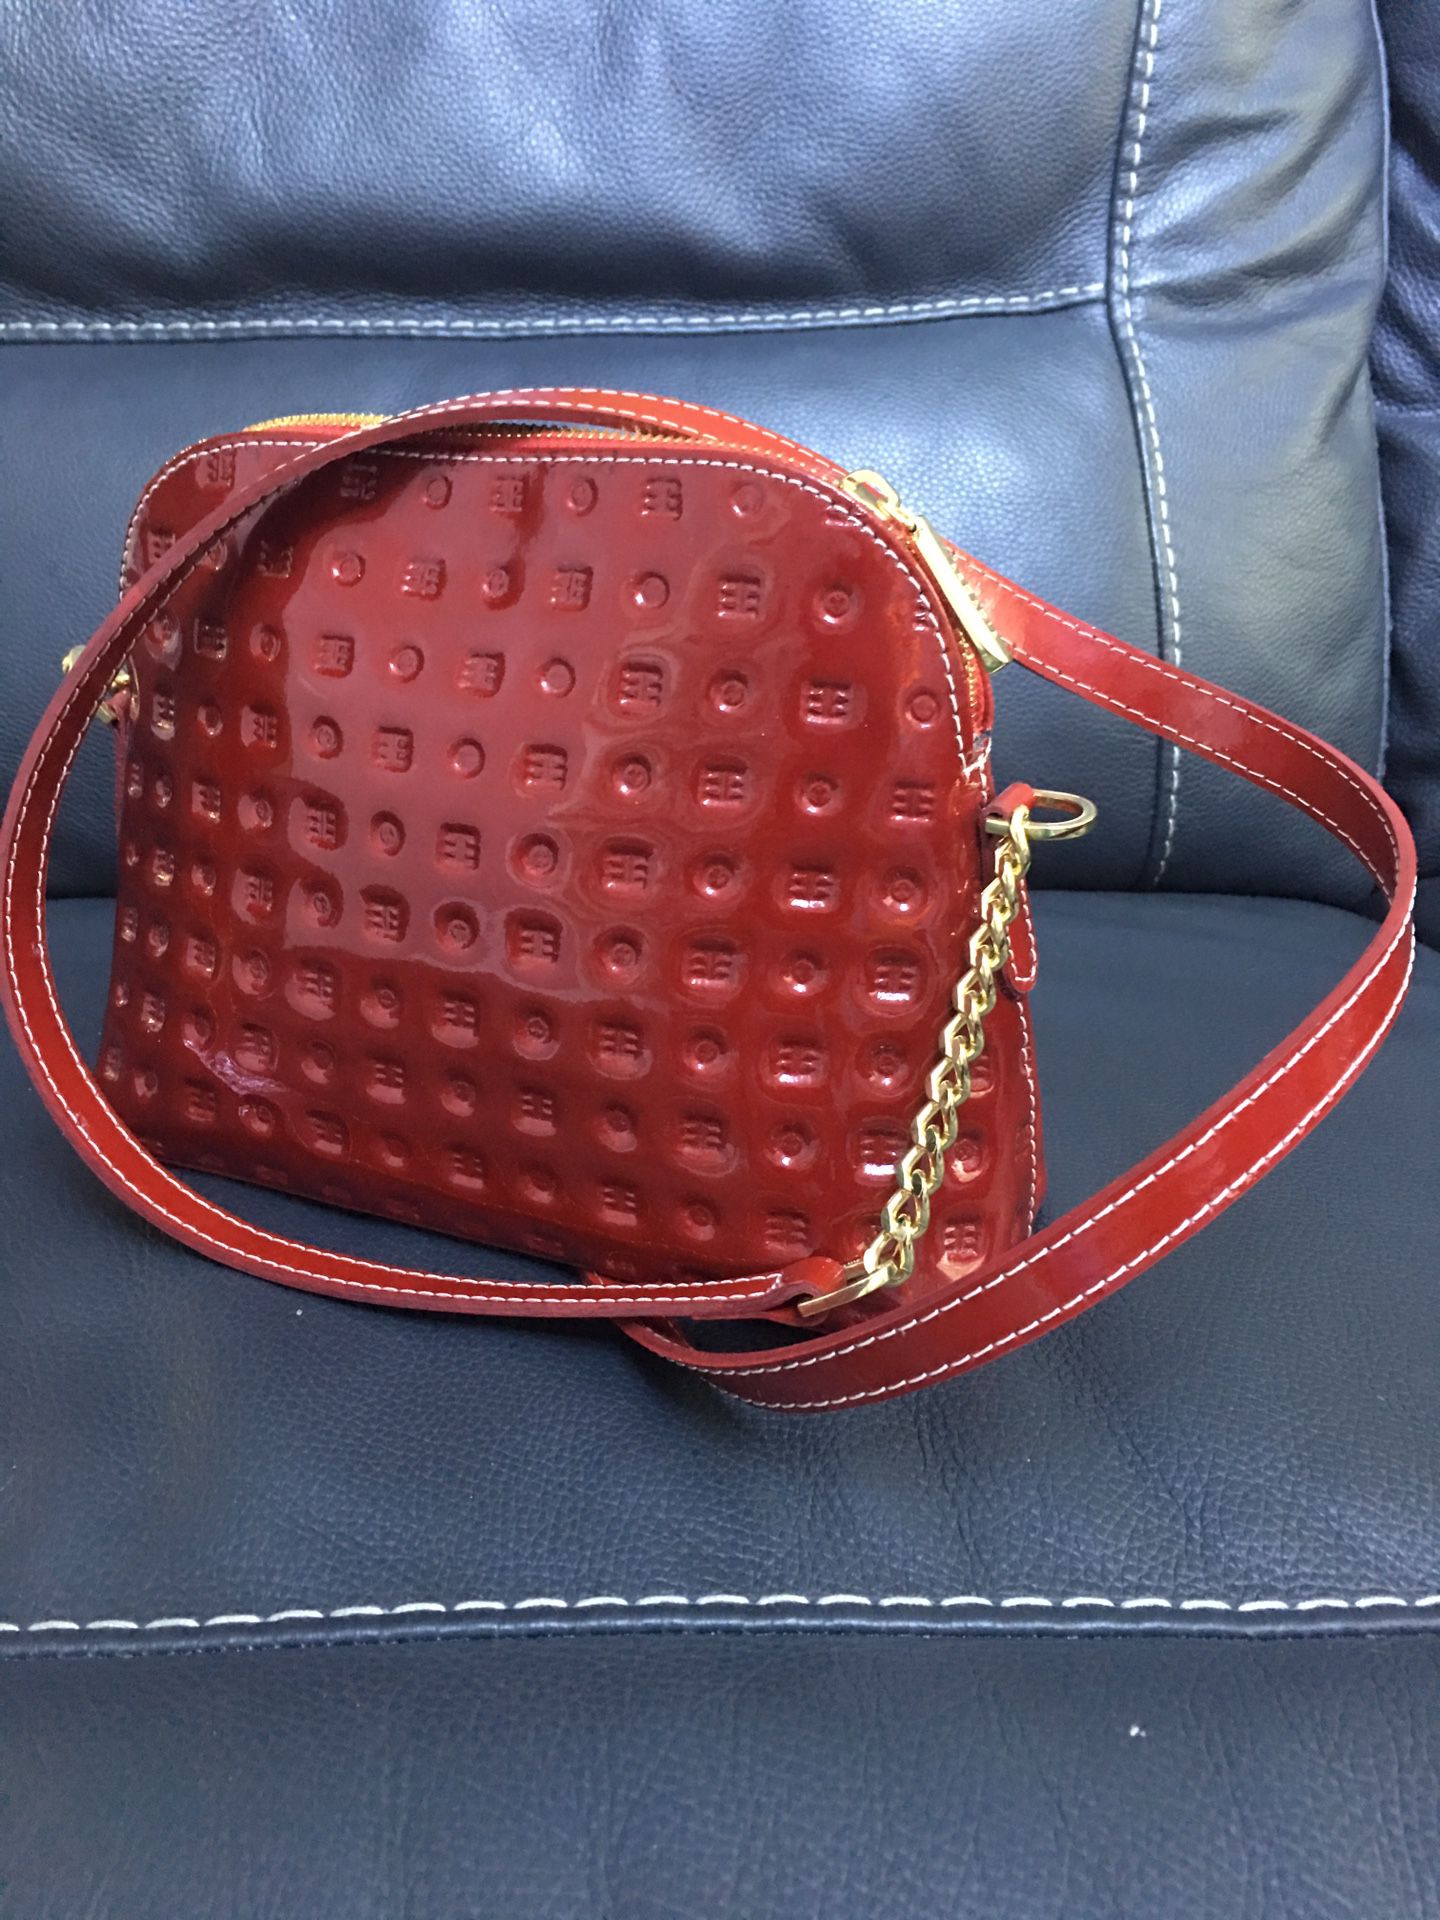 ARCADIA Patent Leather Red Shoulder Bag Messenger Crossbody .Made In Italy